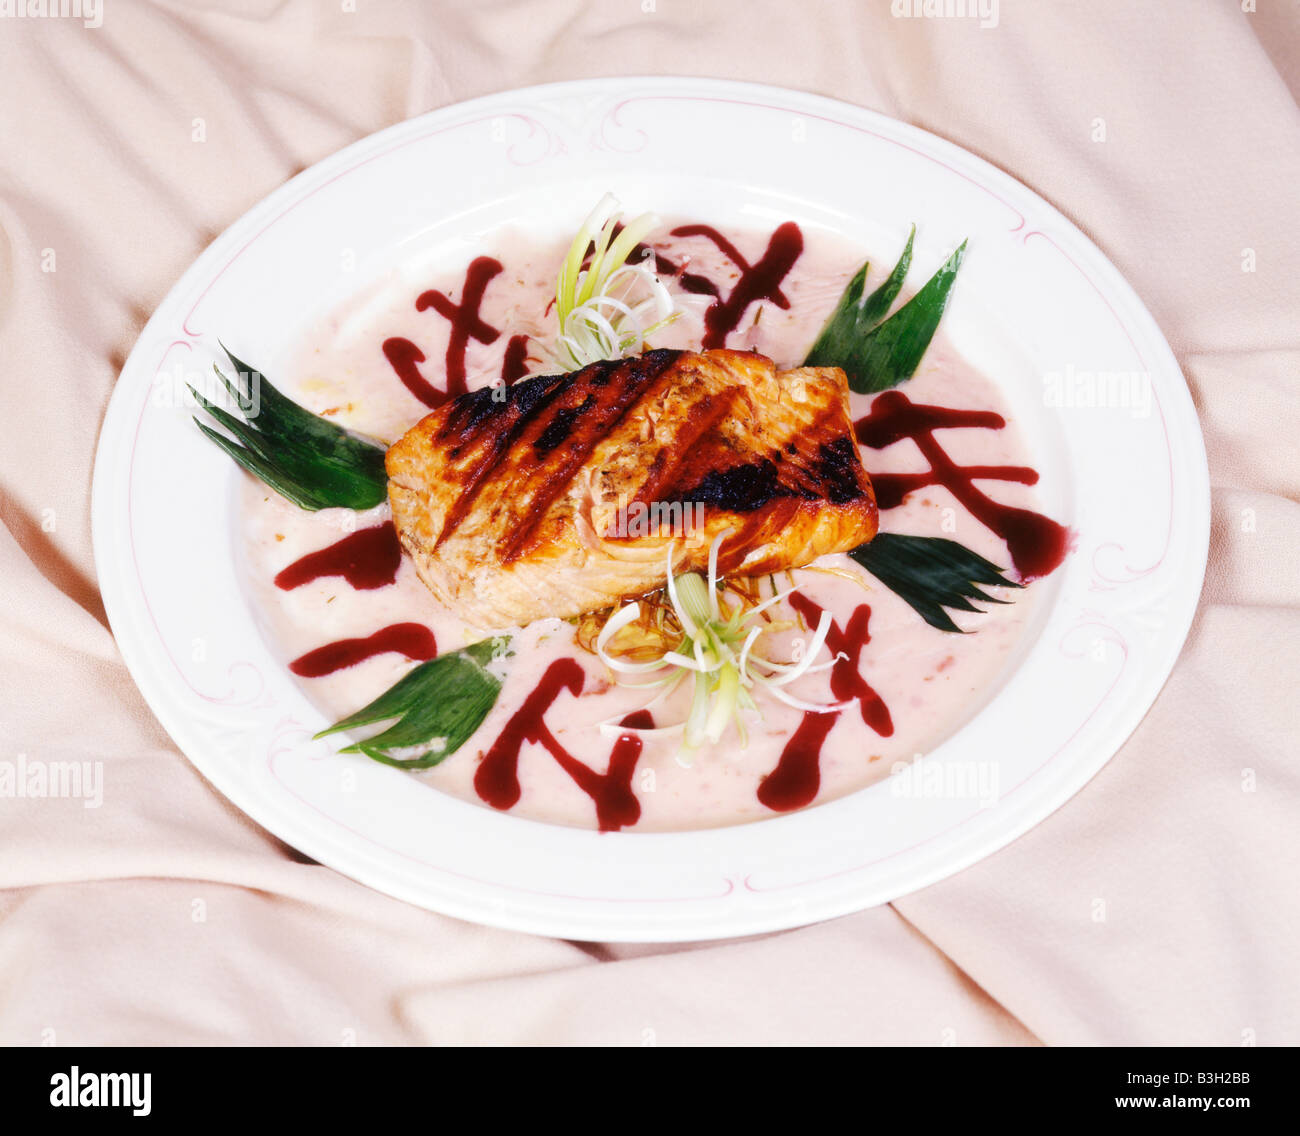 Grilled salmon filet restaurant dinner entree on white plate with garnish Stock Photo